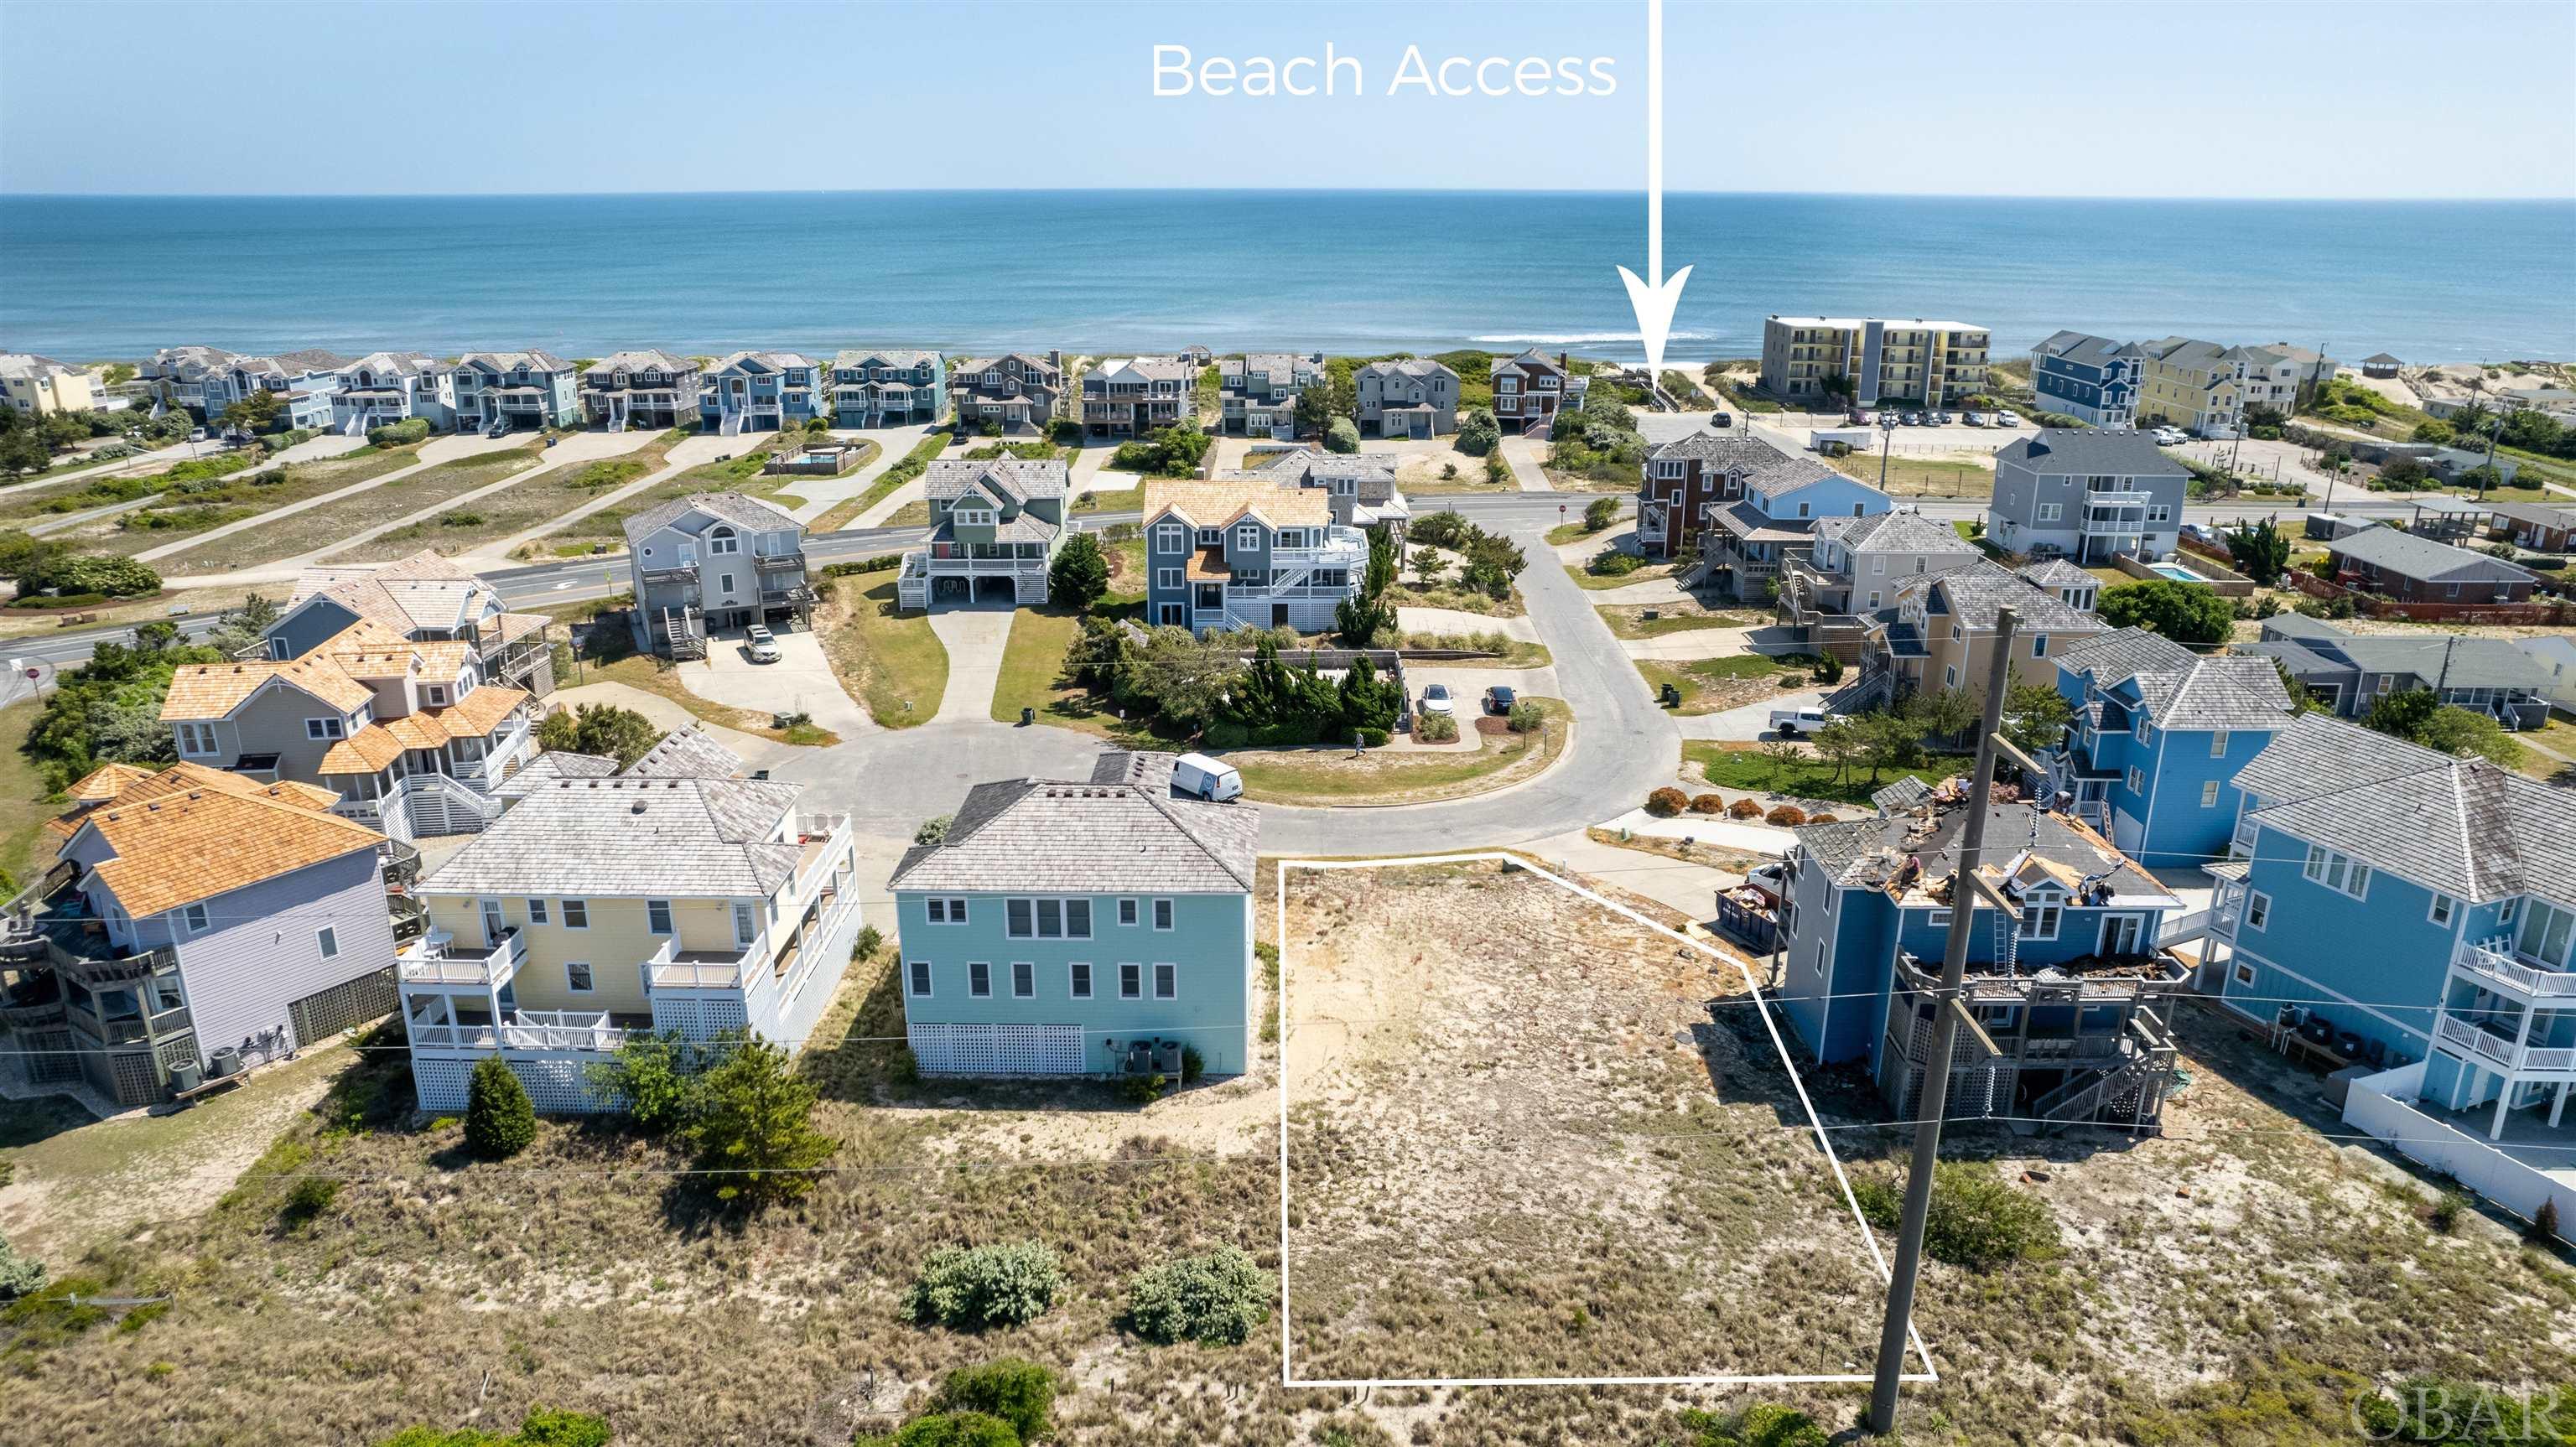 This is an incredible and rare opportunity to own the last vacant lot in Oceanwatch! It is located just steps to the community pool or beach access.  High elevation of the property should provide a view of the ocean and sound and the golf course.  The location is also in the heart of The Village at Nags Head.  The private community pool located directly across the street is for the small neighborhood of Oceanwatch only. Unlike most areas of the Outer Banks, The Village at Nags Head connects to the community septic system, allowing more lot coverage without worrying about installing a septic system.  The Village at Nags Head is a private ocean-to-sound golf course community; enjoy two private sound front accesses with piers, a gazebo, swings, a boat ramp, and more. Hop on the Village Shuttle for a ride to the ocean beach access with a bathhouse and dune top gazebo. Optional membership to The Village Beach Club with Olympic-sized oceanfront pool, beach equipment rental, clubhouse snack, and beverage bar. The Village At Nags Head is a resort community and the only one in Nags Head. The location is unbeatable, within a short walk or drive to many shopping, dining, and entertainment options.  There is something for the whole family to enjoy.